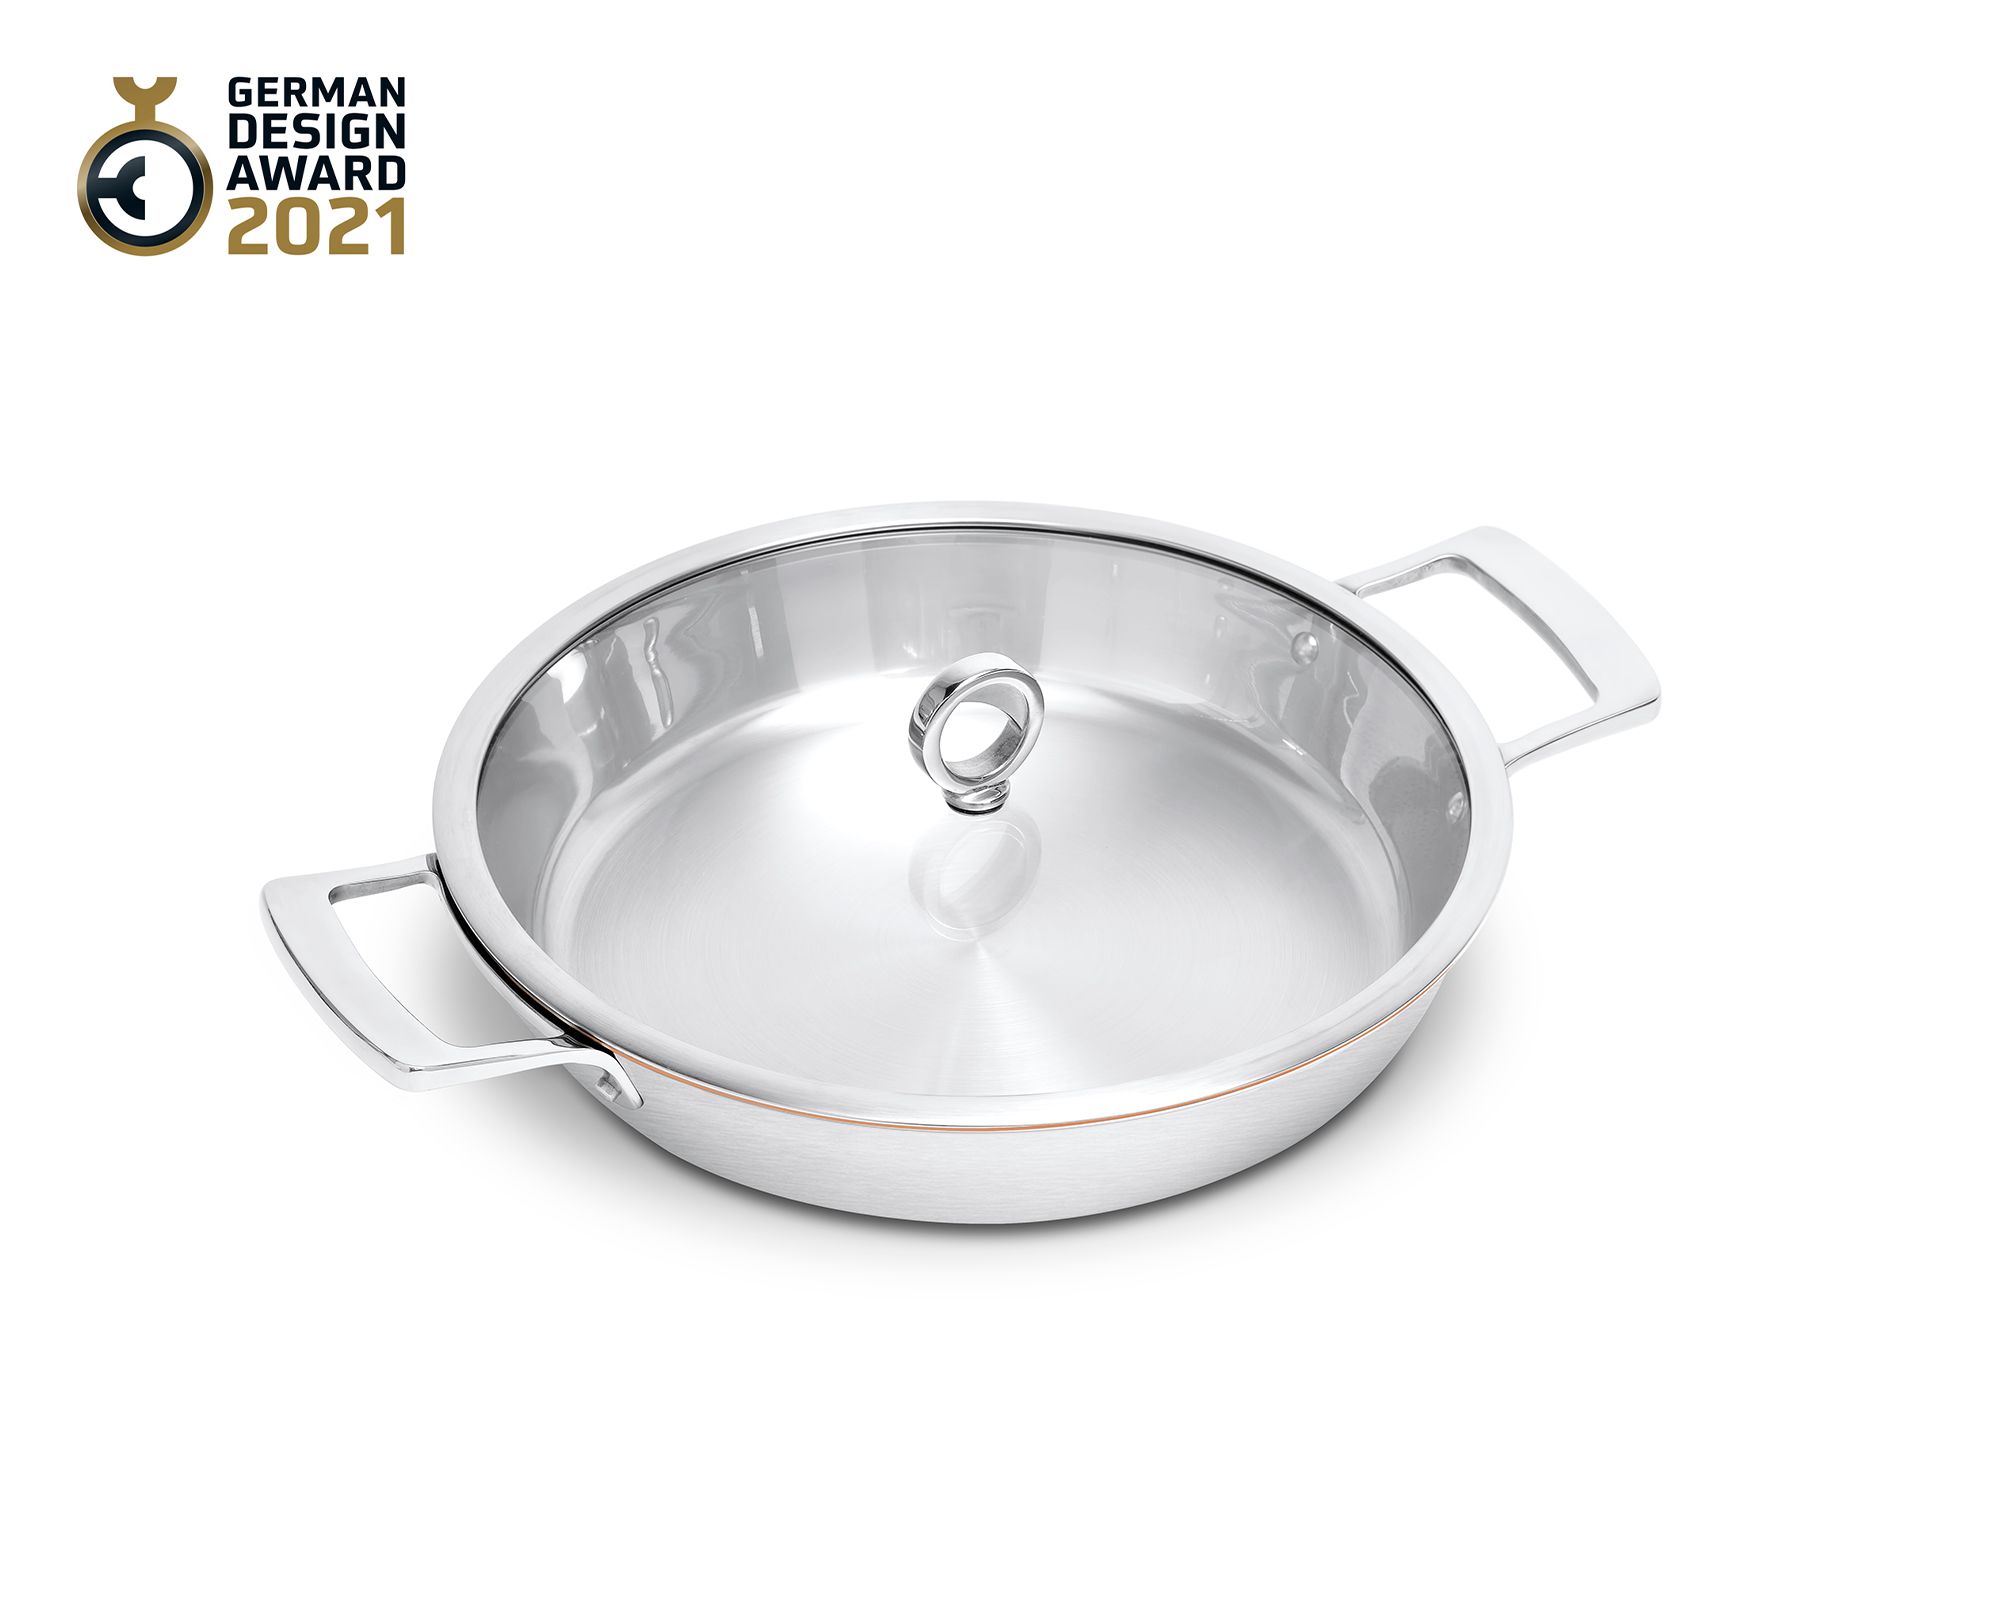 Uncoated 30cm Olav serving pan from the side